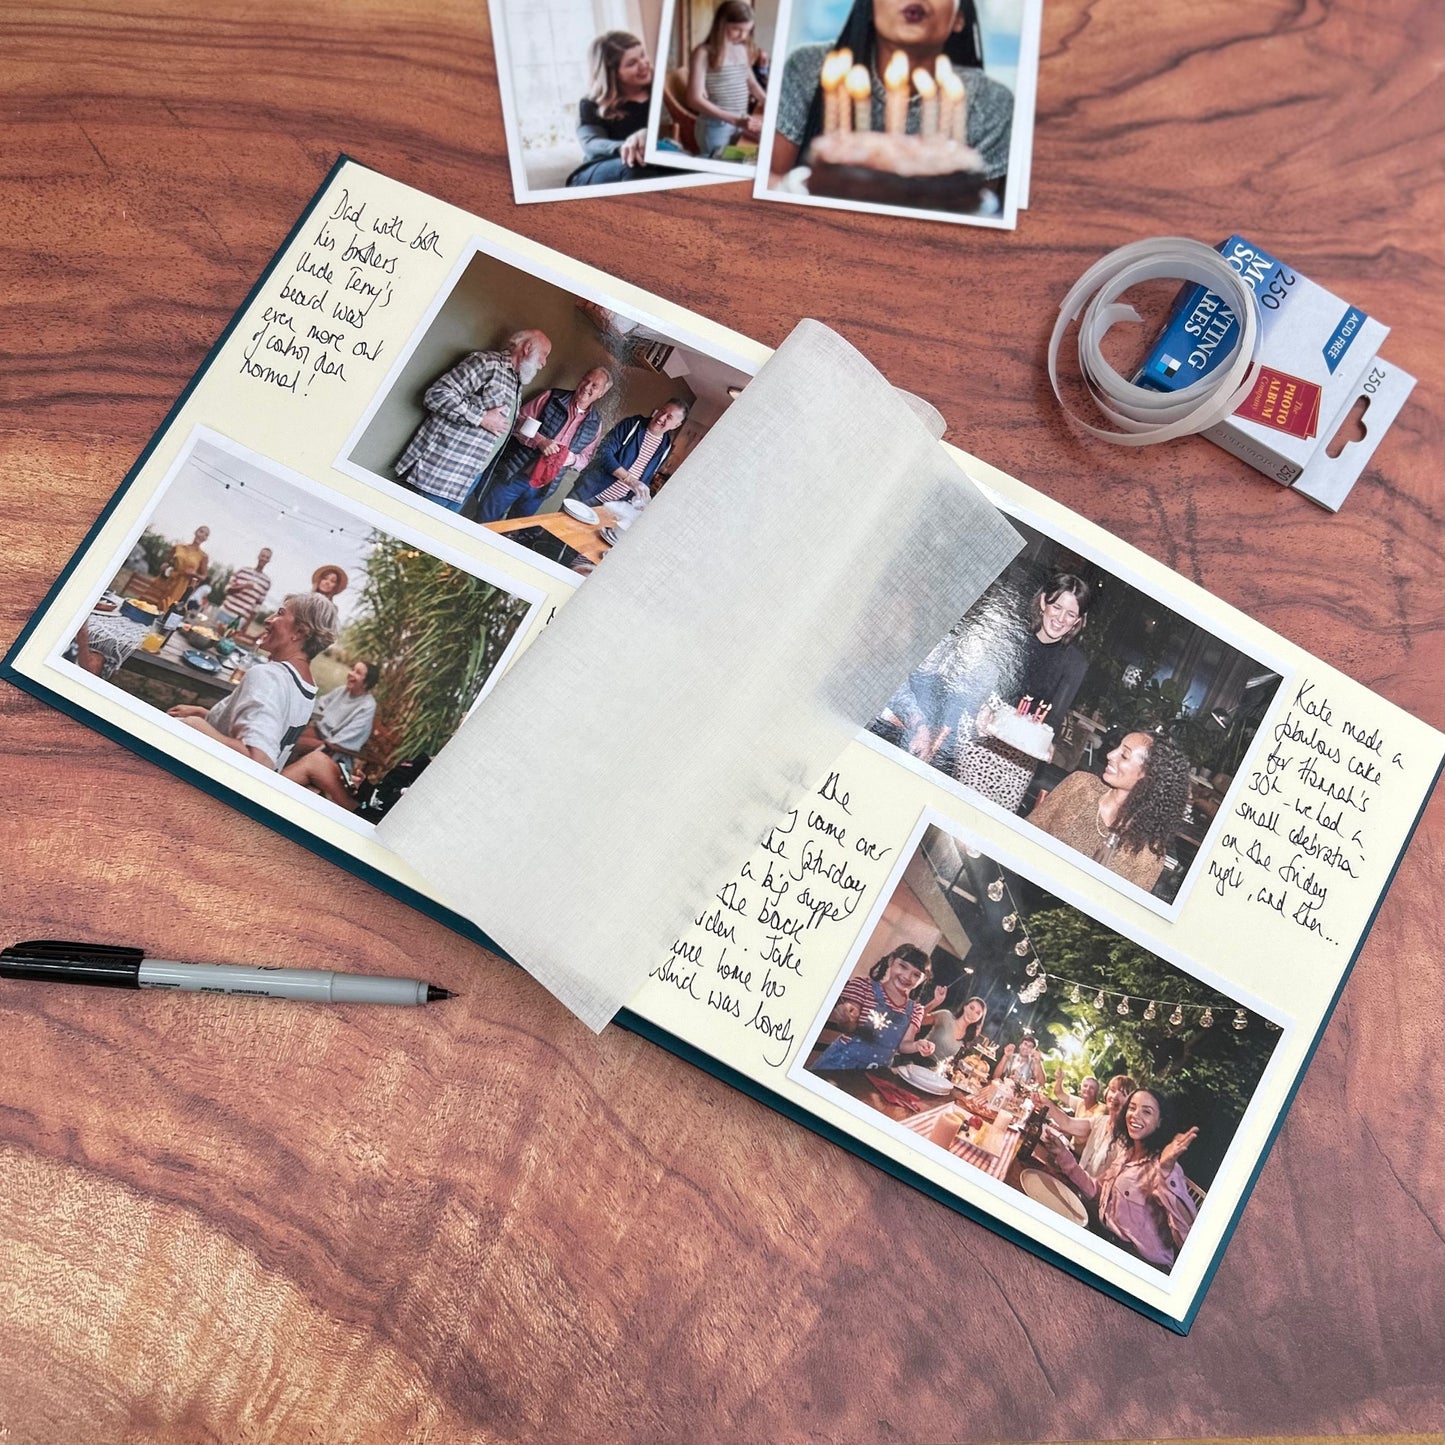 a photo album lies open on a wooden table and you can see all the fanily photos inside